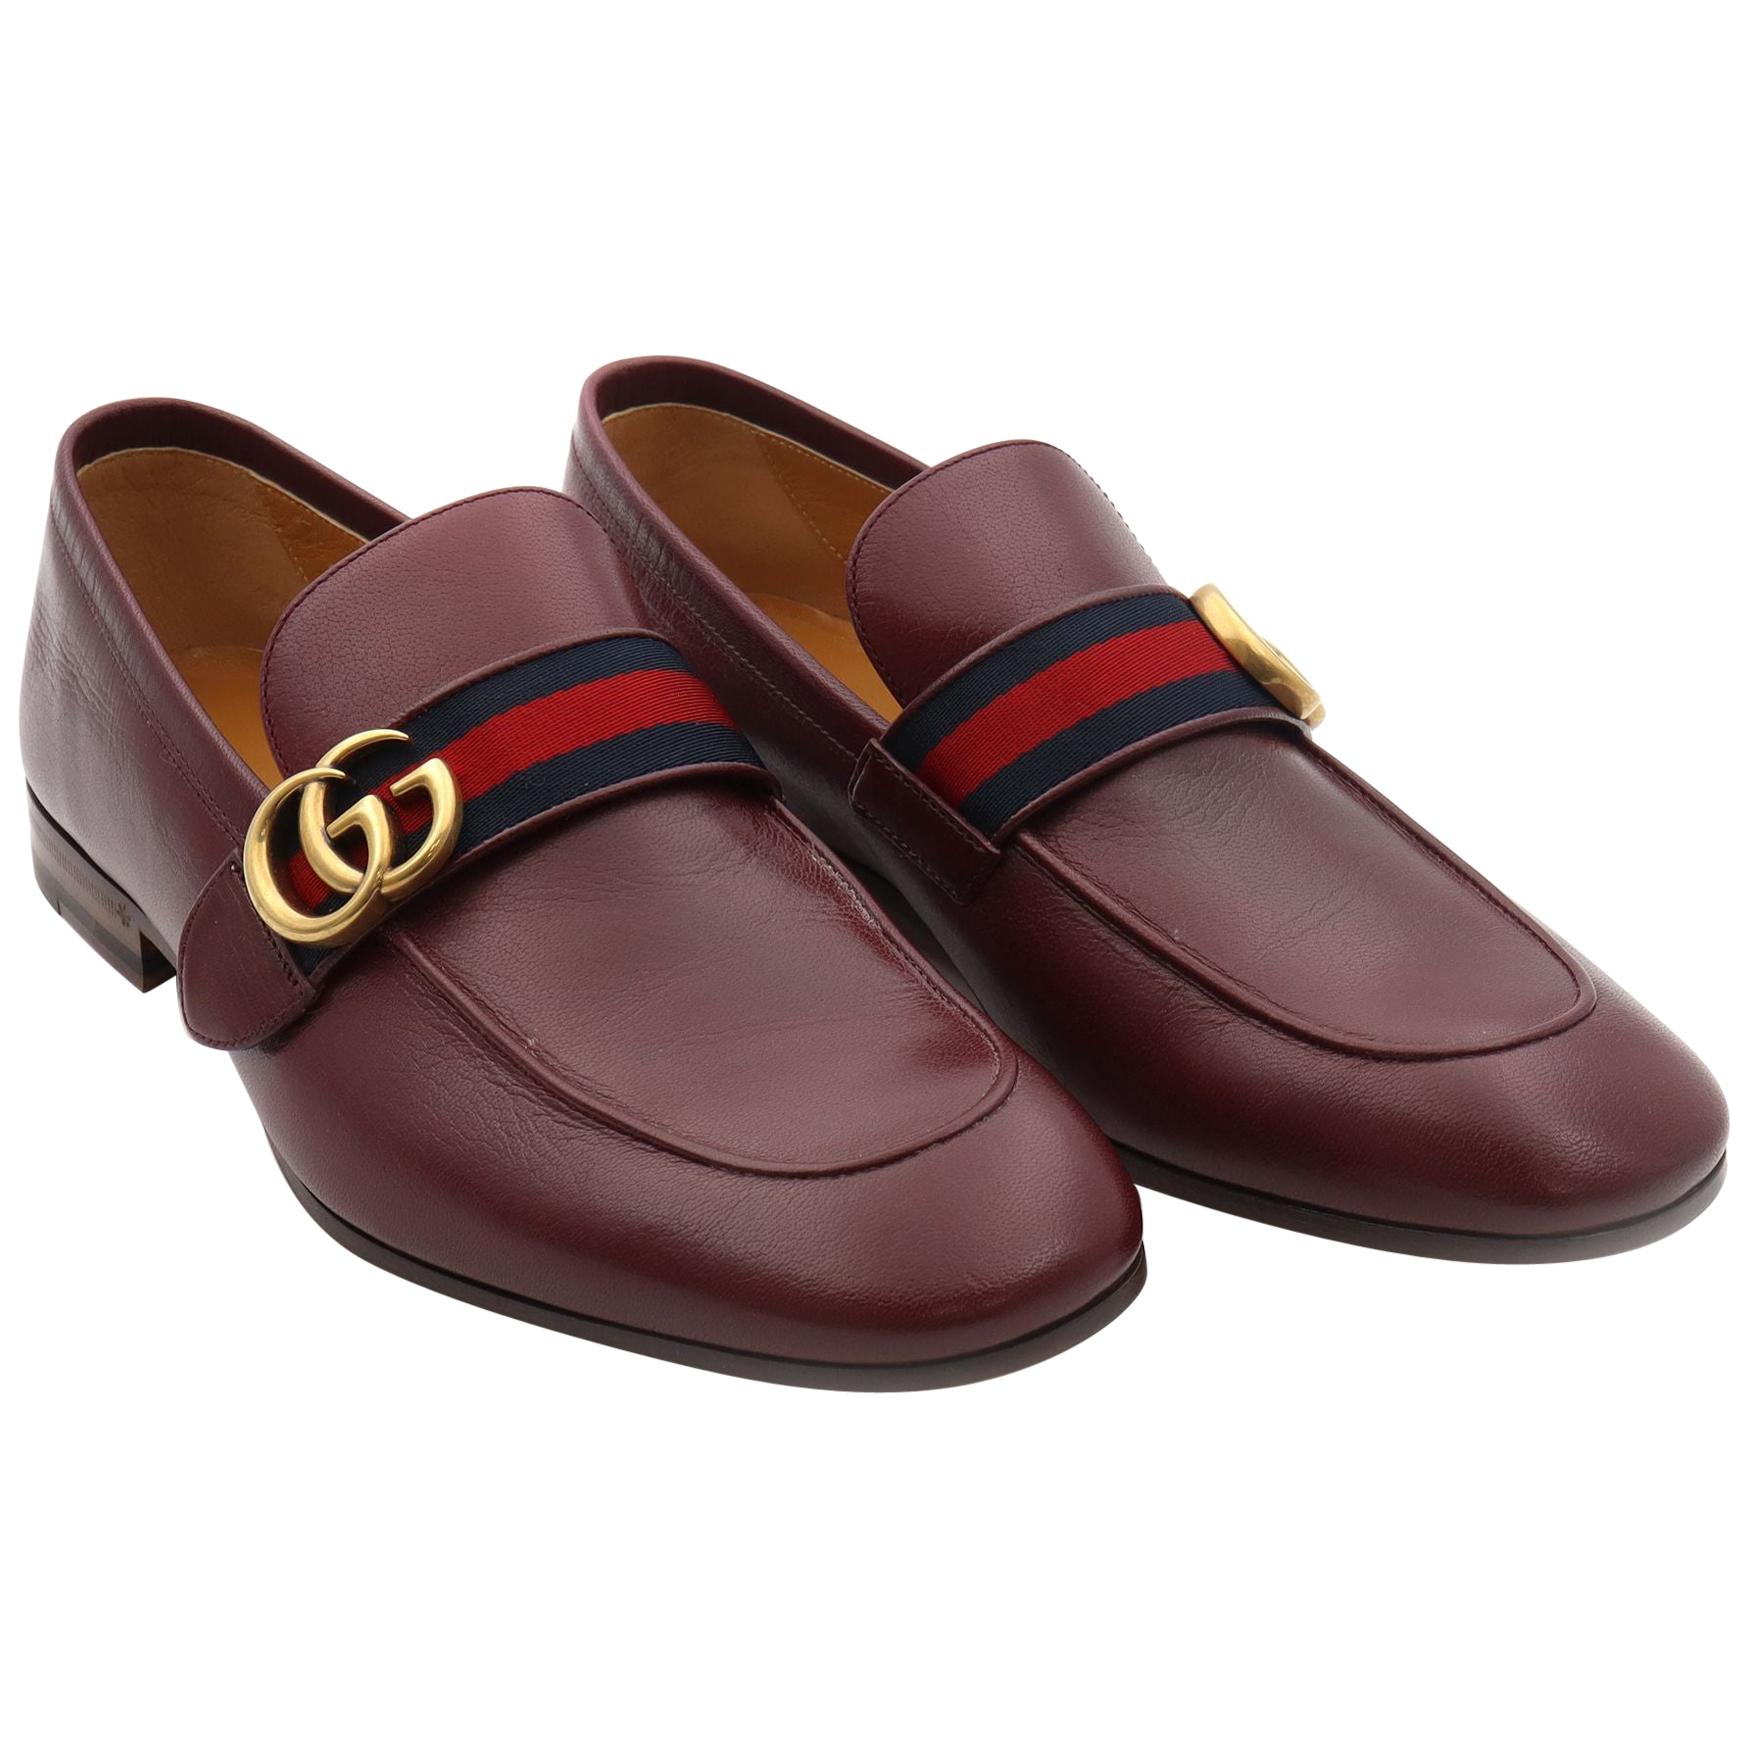 Gucci Men's GG Donnie Web Leather Burgundy Loafers Size 8